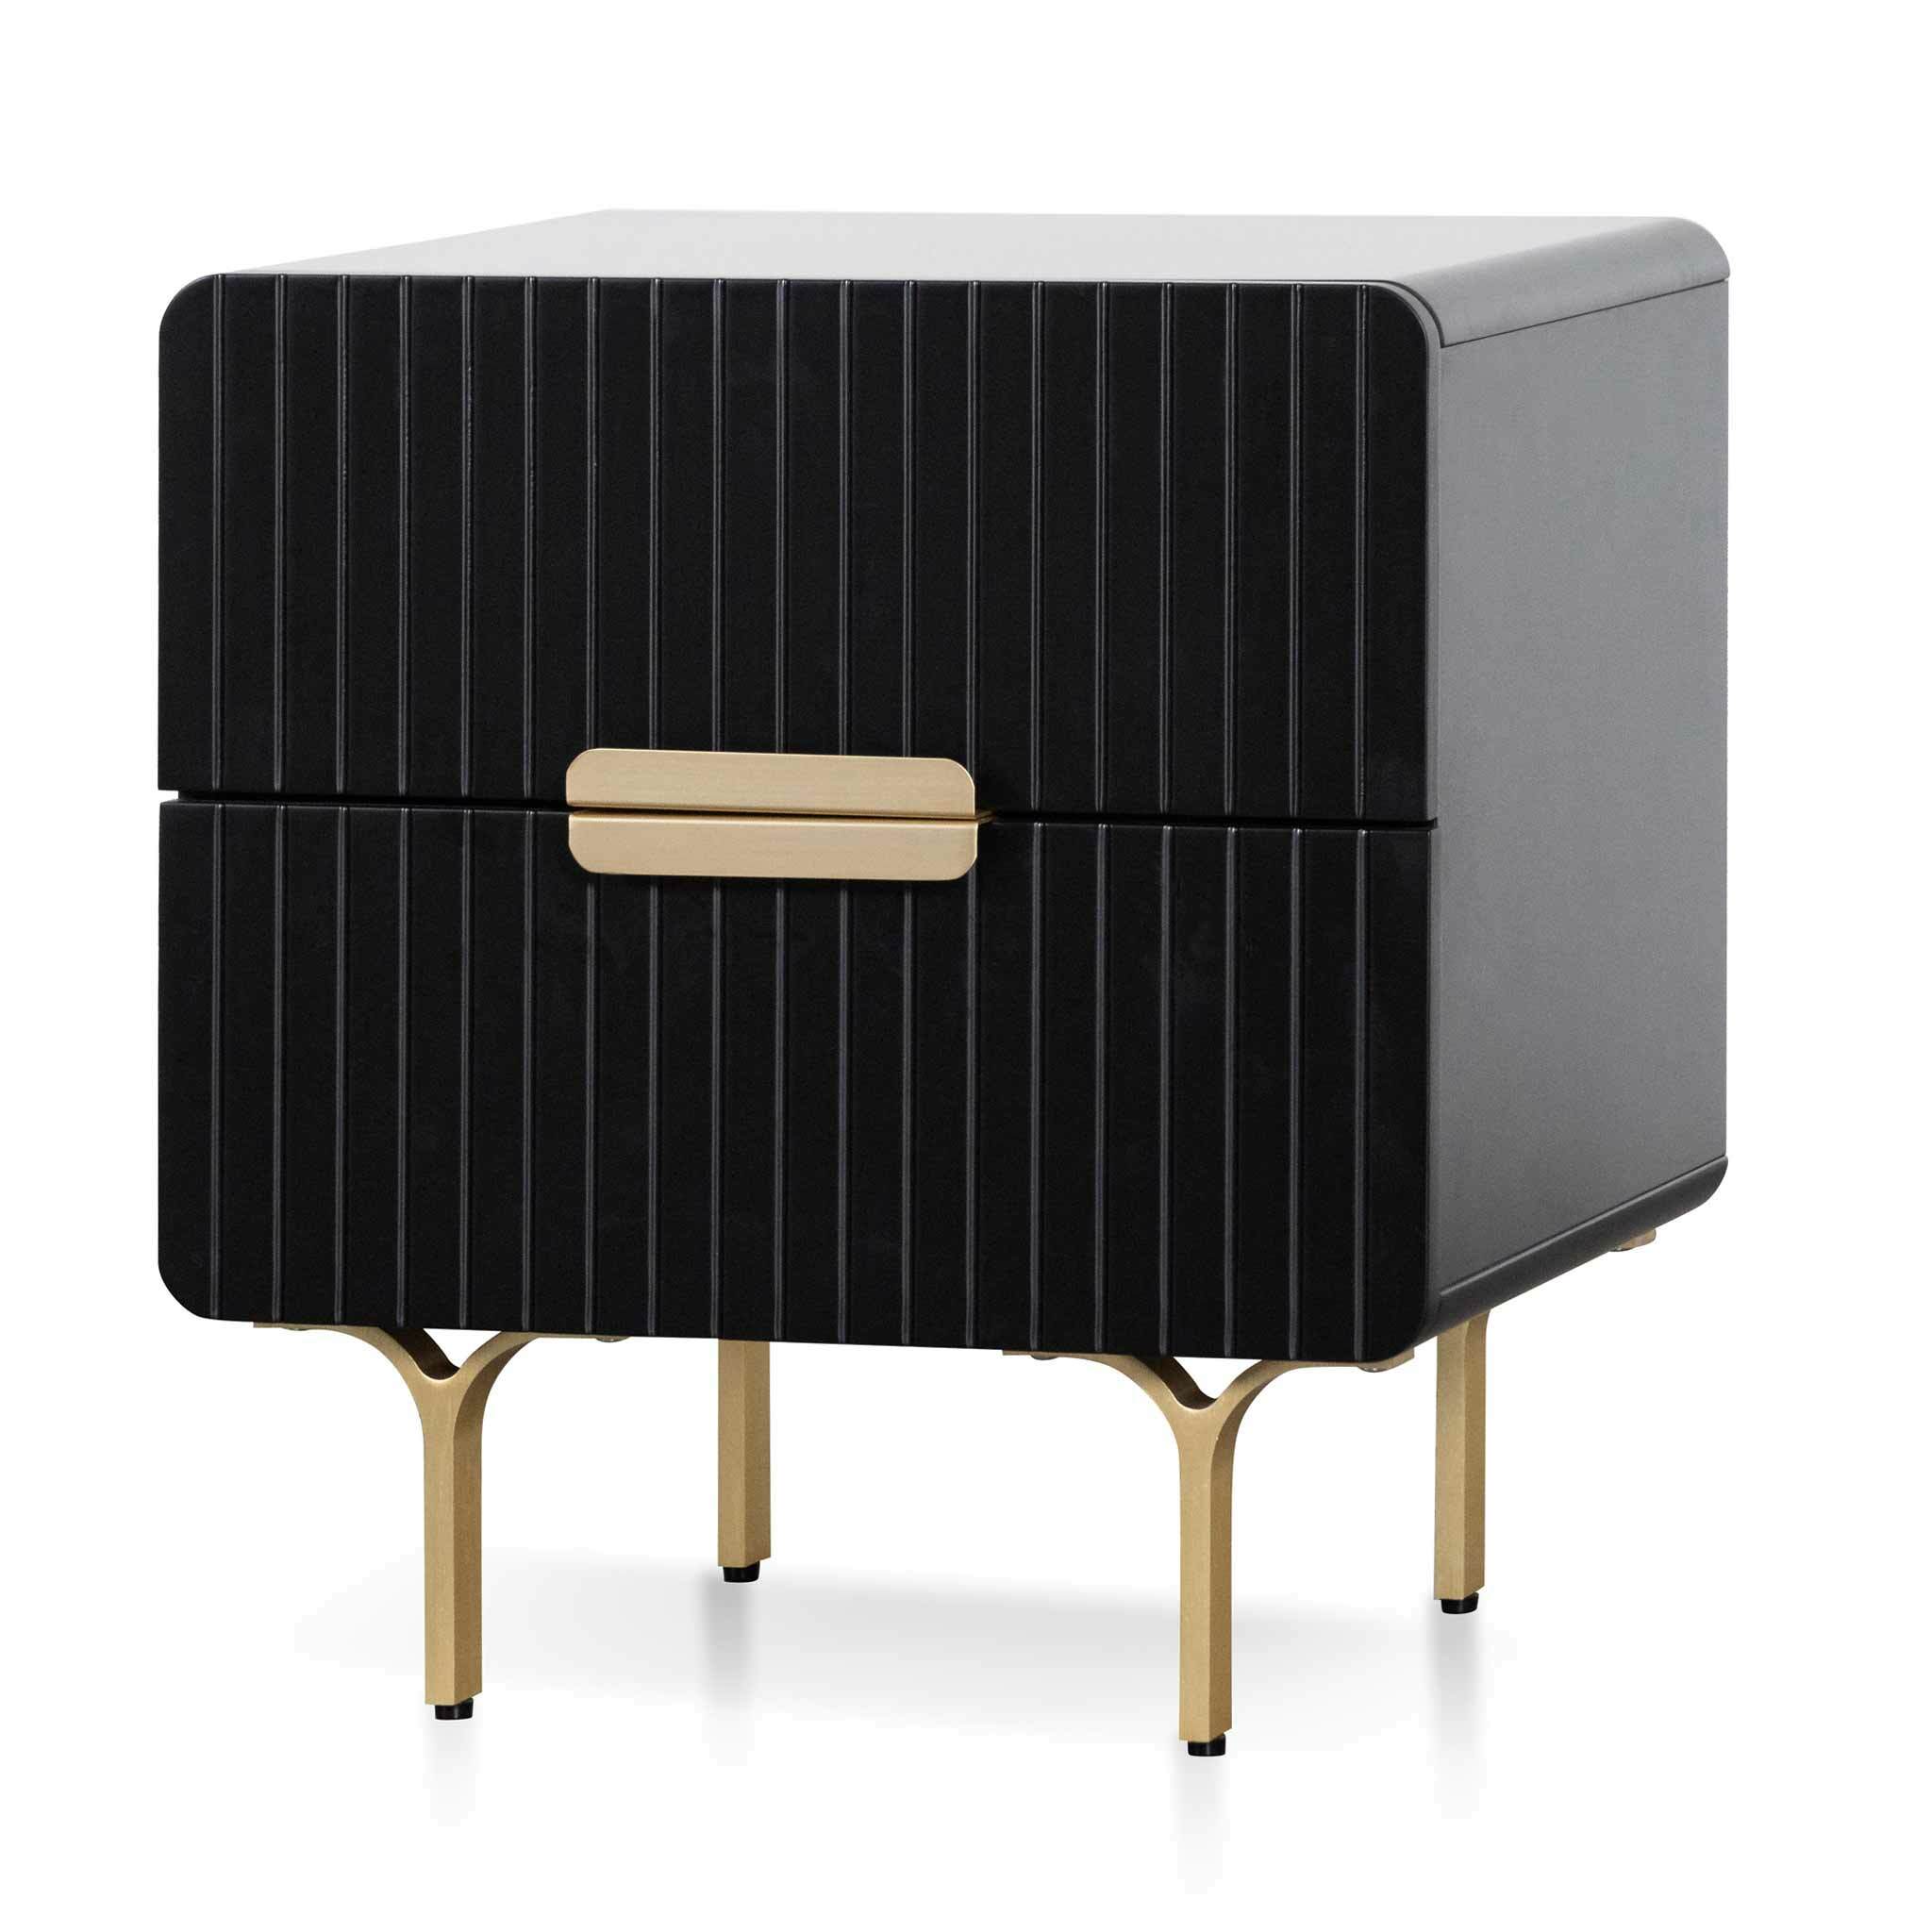 Erwin Matte Black Bedside Table - Brass Legs and Handle